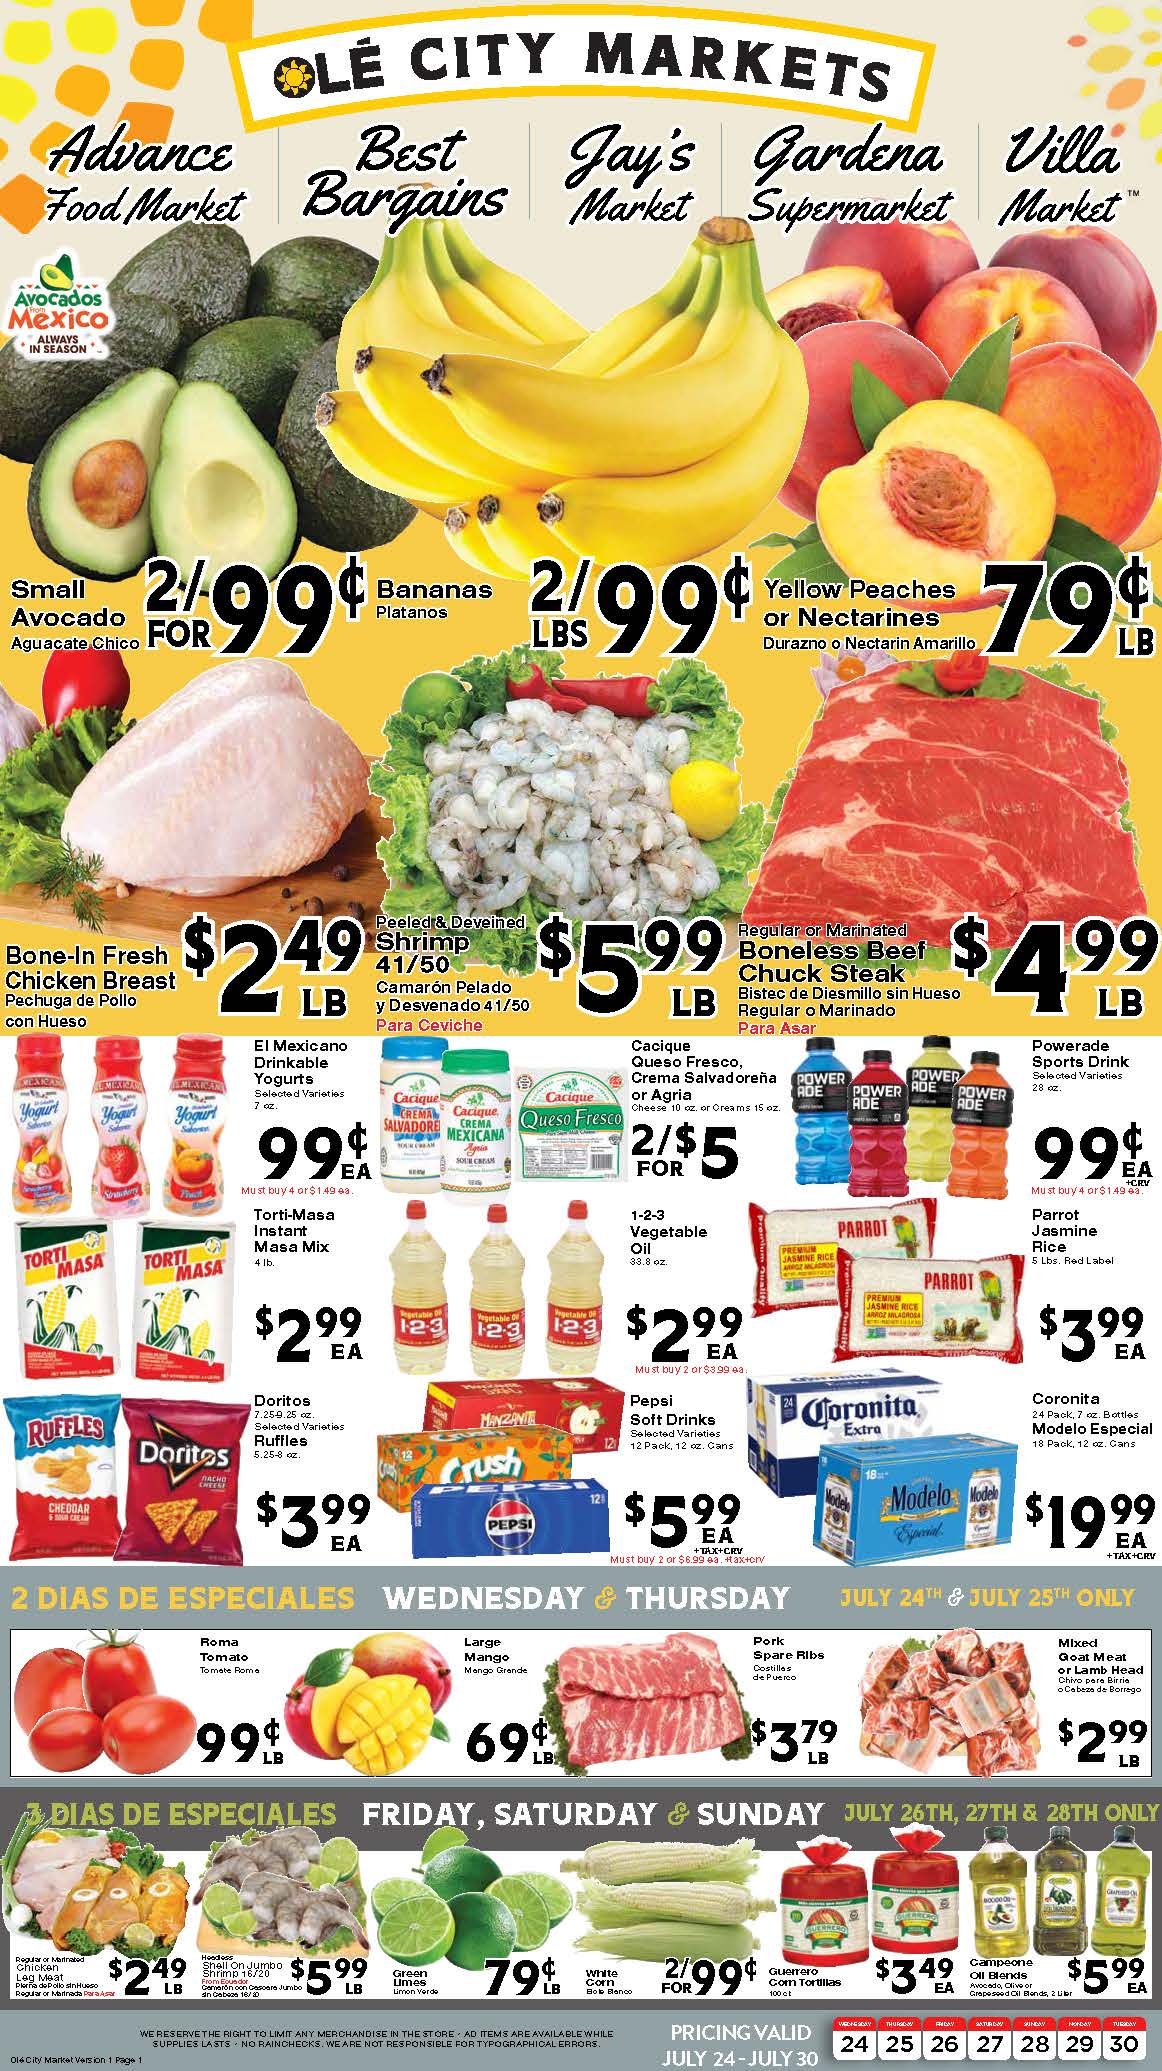 Weekly Ad from 03/22/23 to 03/28/23 page1